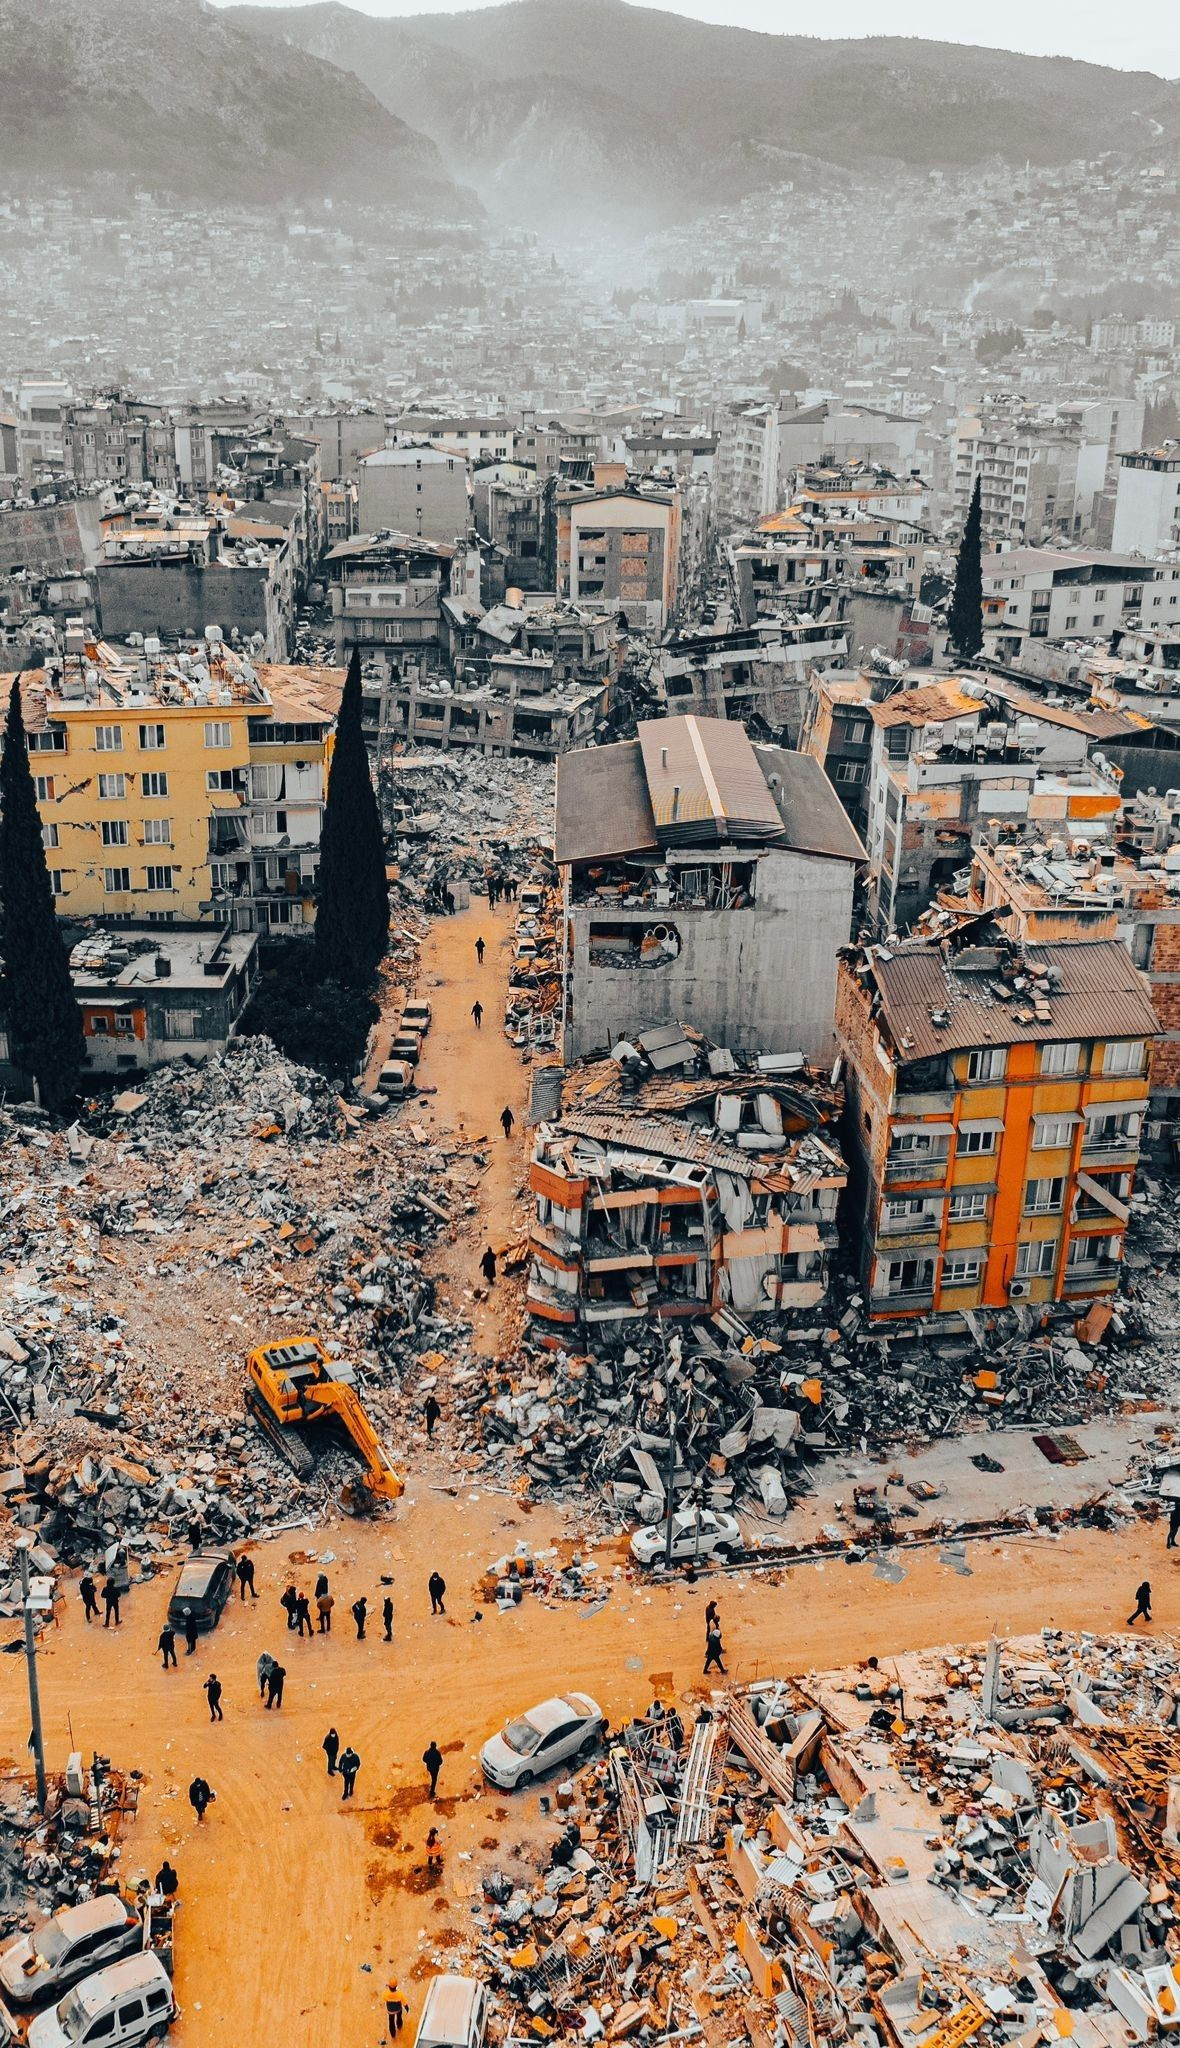 Drone images show destruction in quake-stricken Hatay province - Page 2